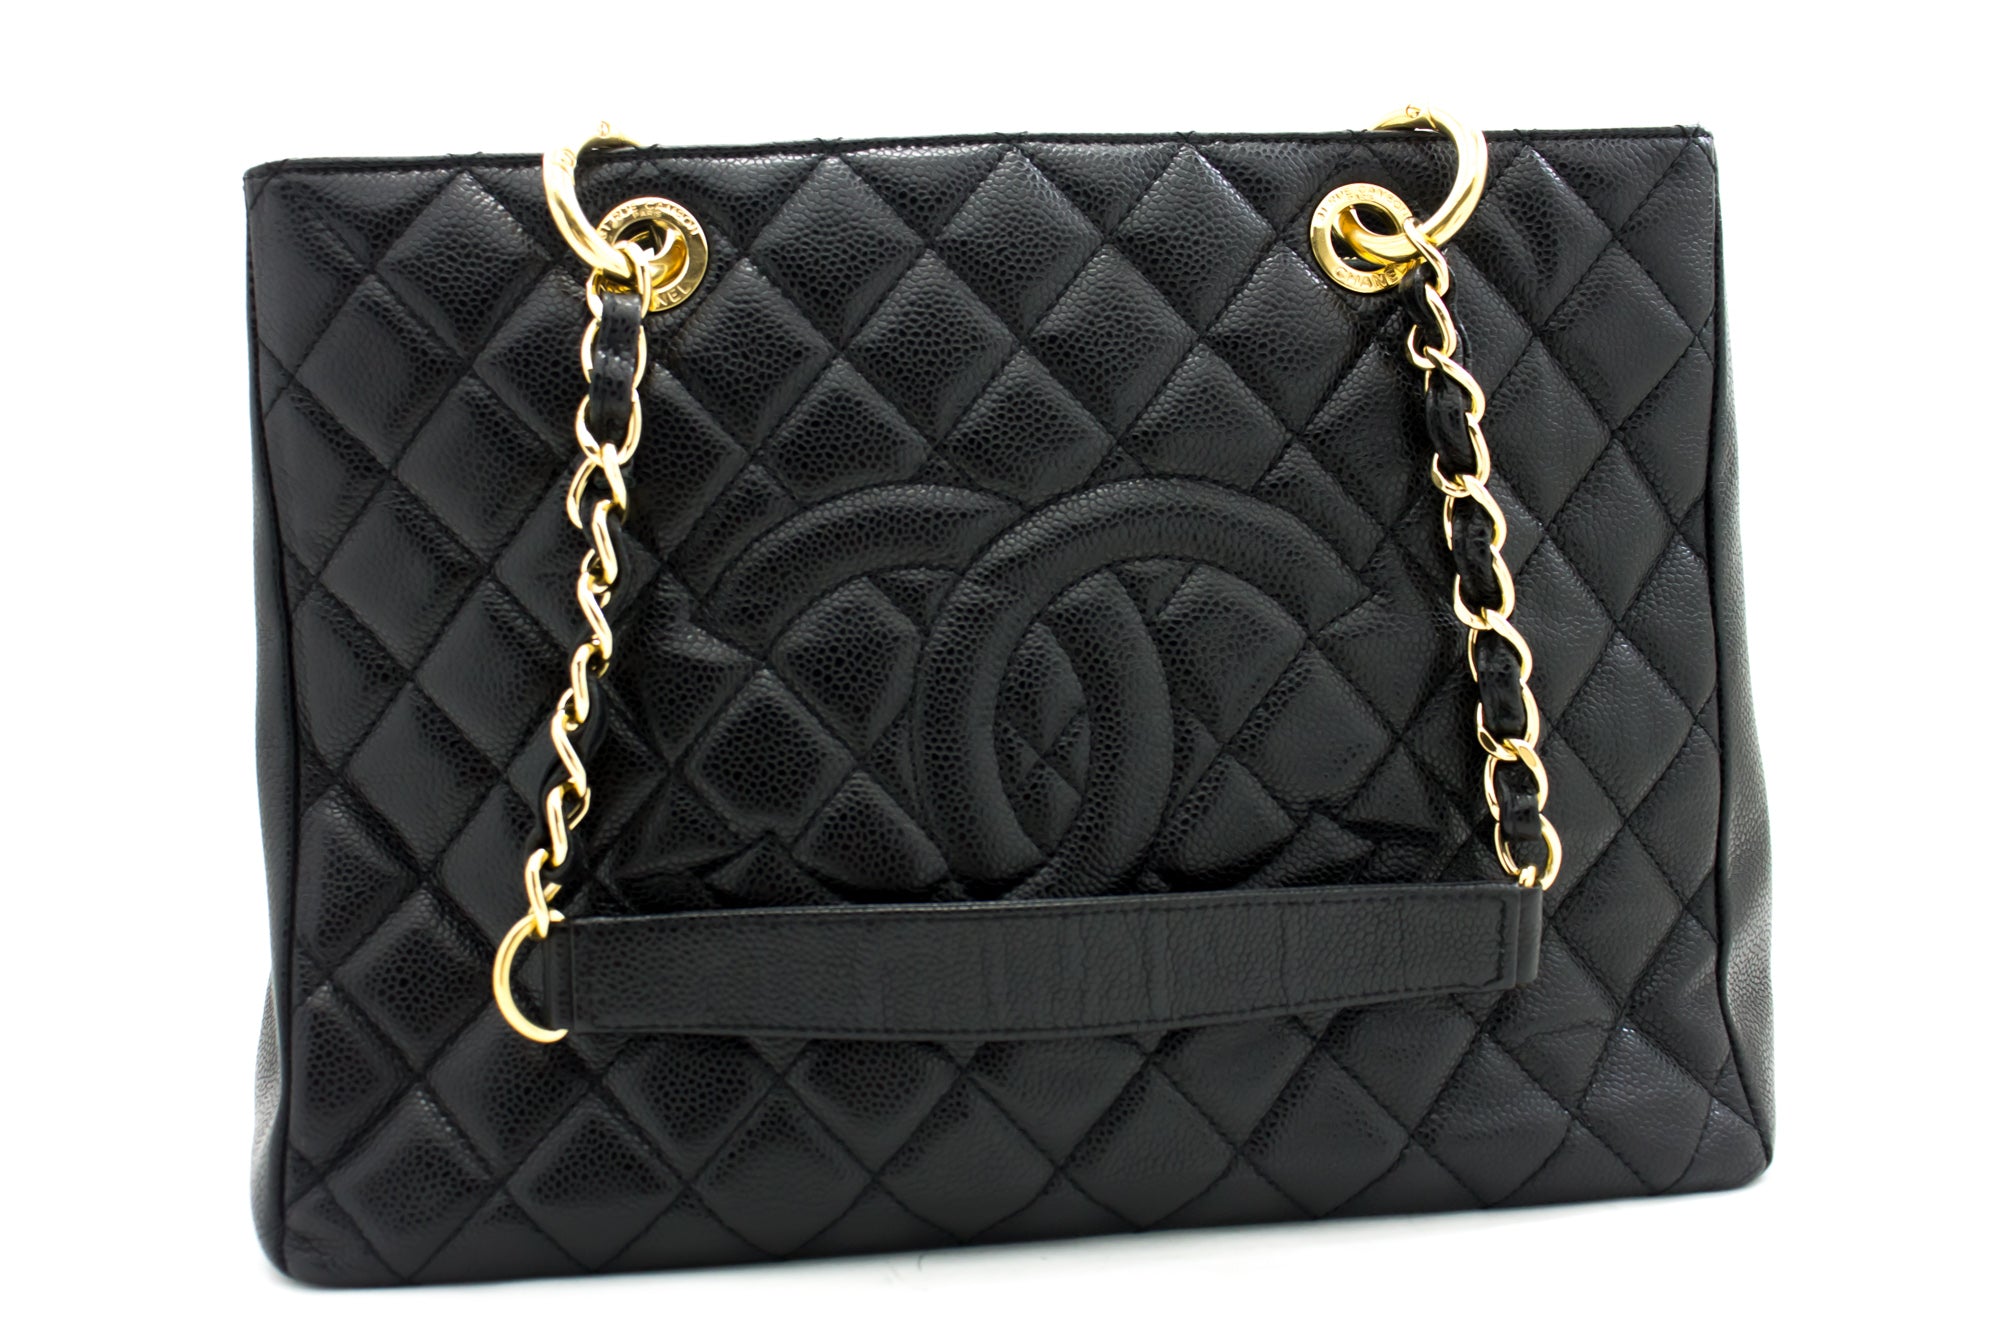 CHANEL BAG Grand Shopping Black Quilted Leather Shoulder -  Norway